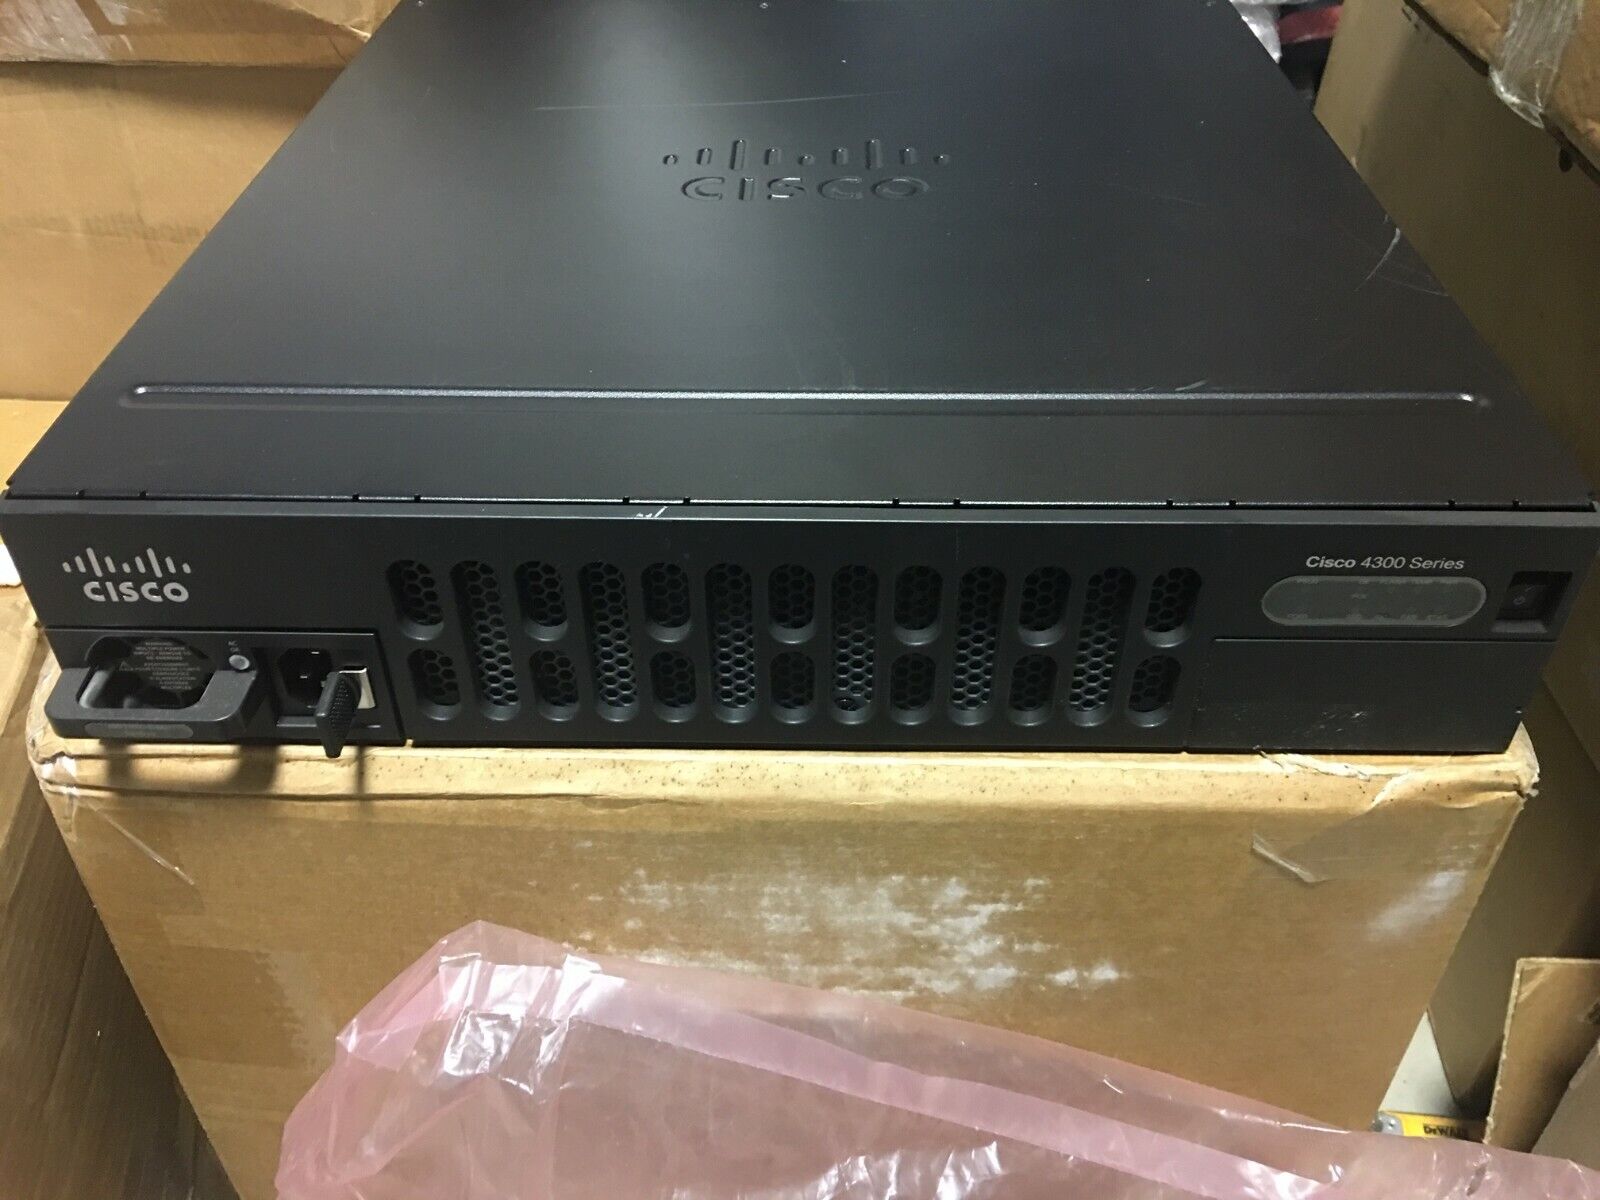  Cisco ISR4351-SEC/K9 Service Router ISR4351-X NOT AFFECTED